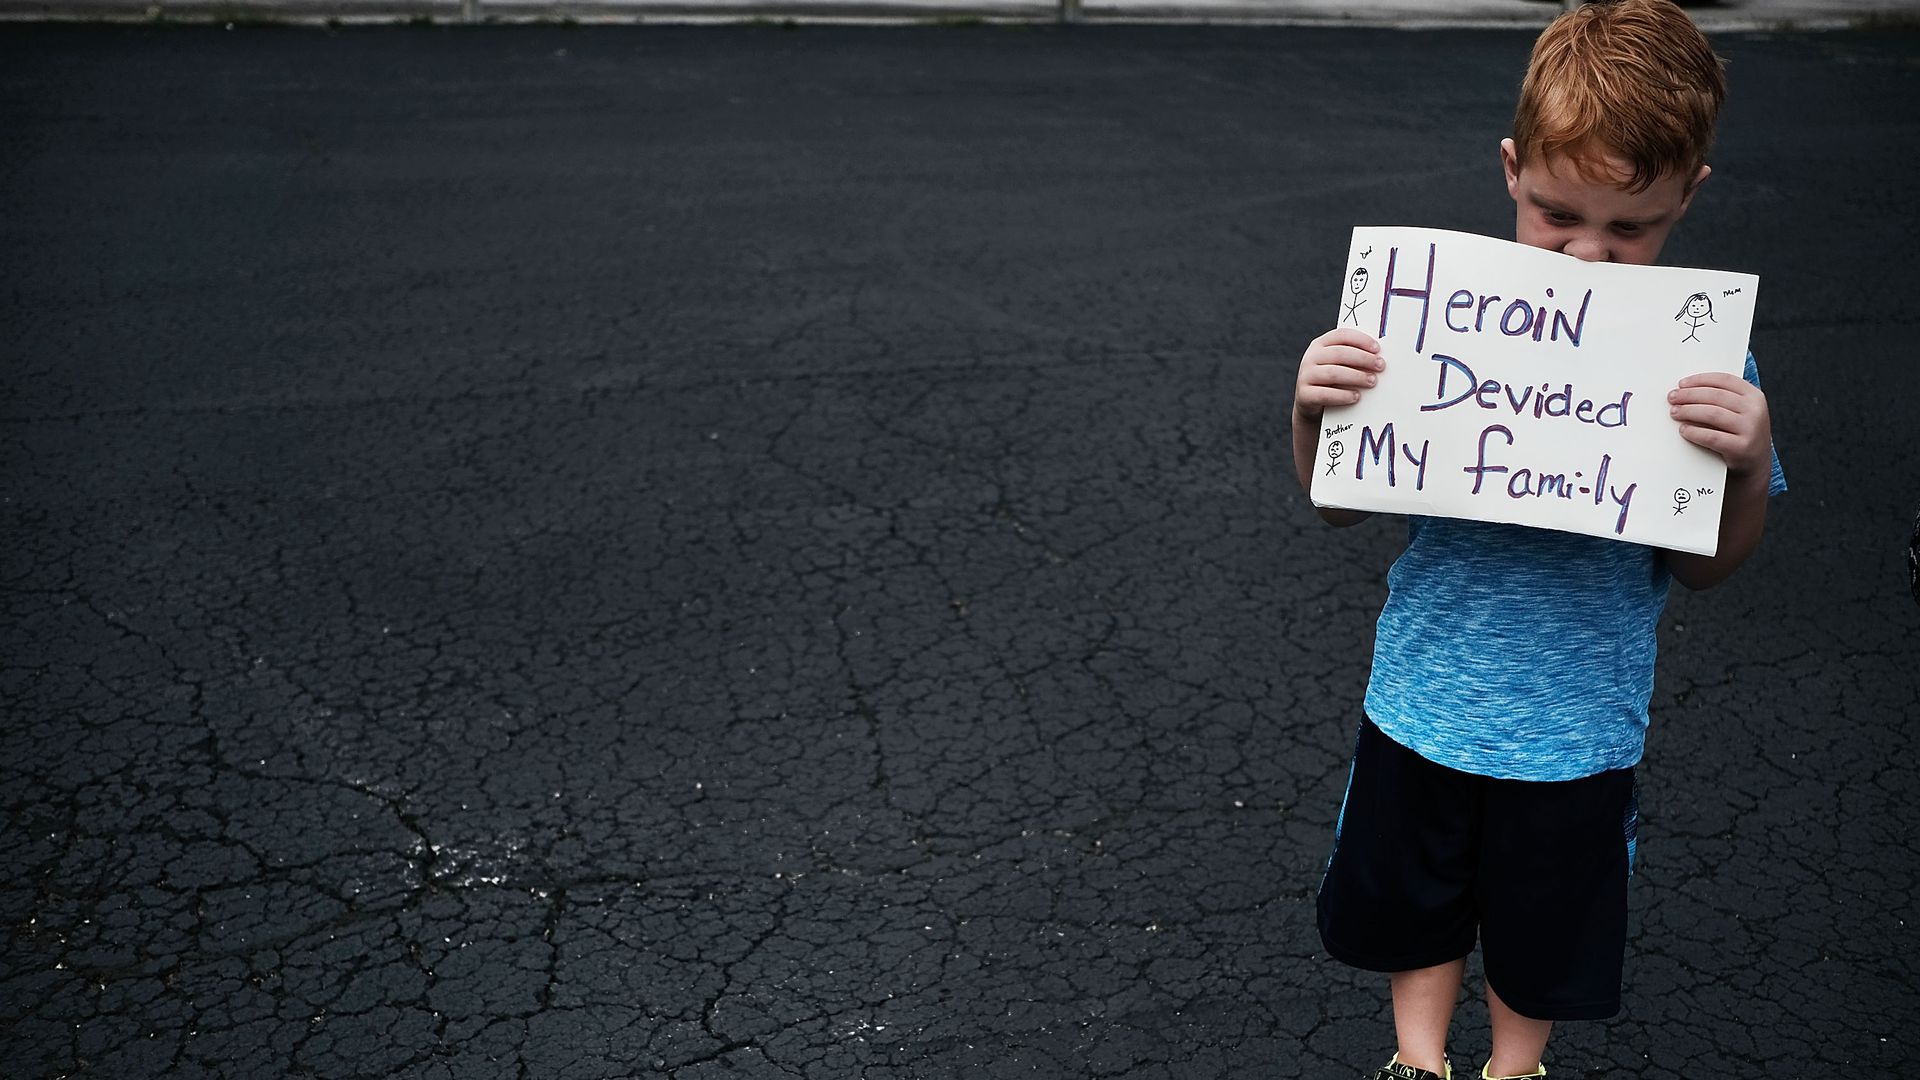 A child holds a sign that says "Heroin divided my family" 